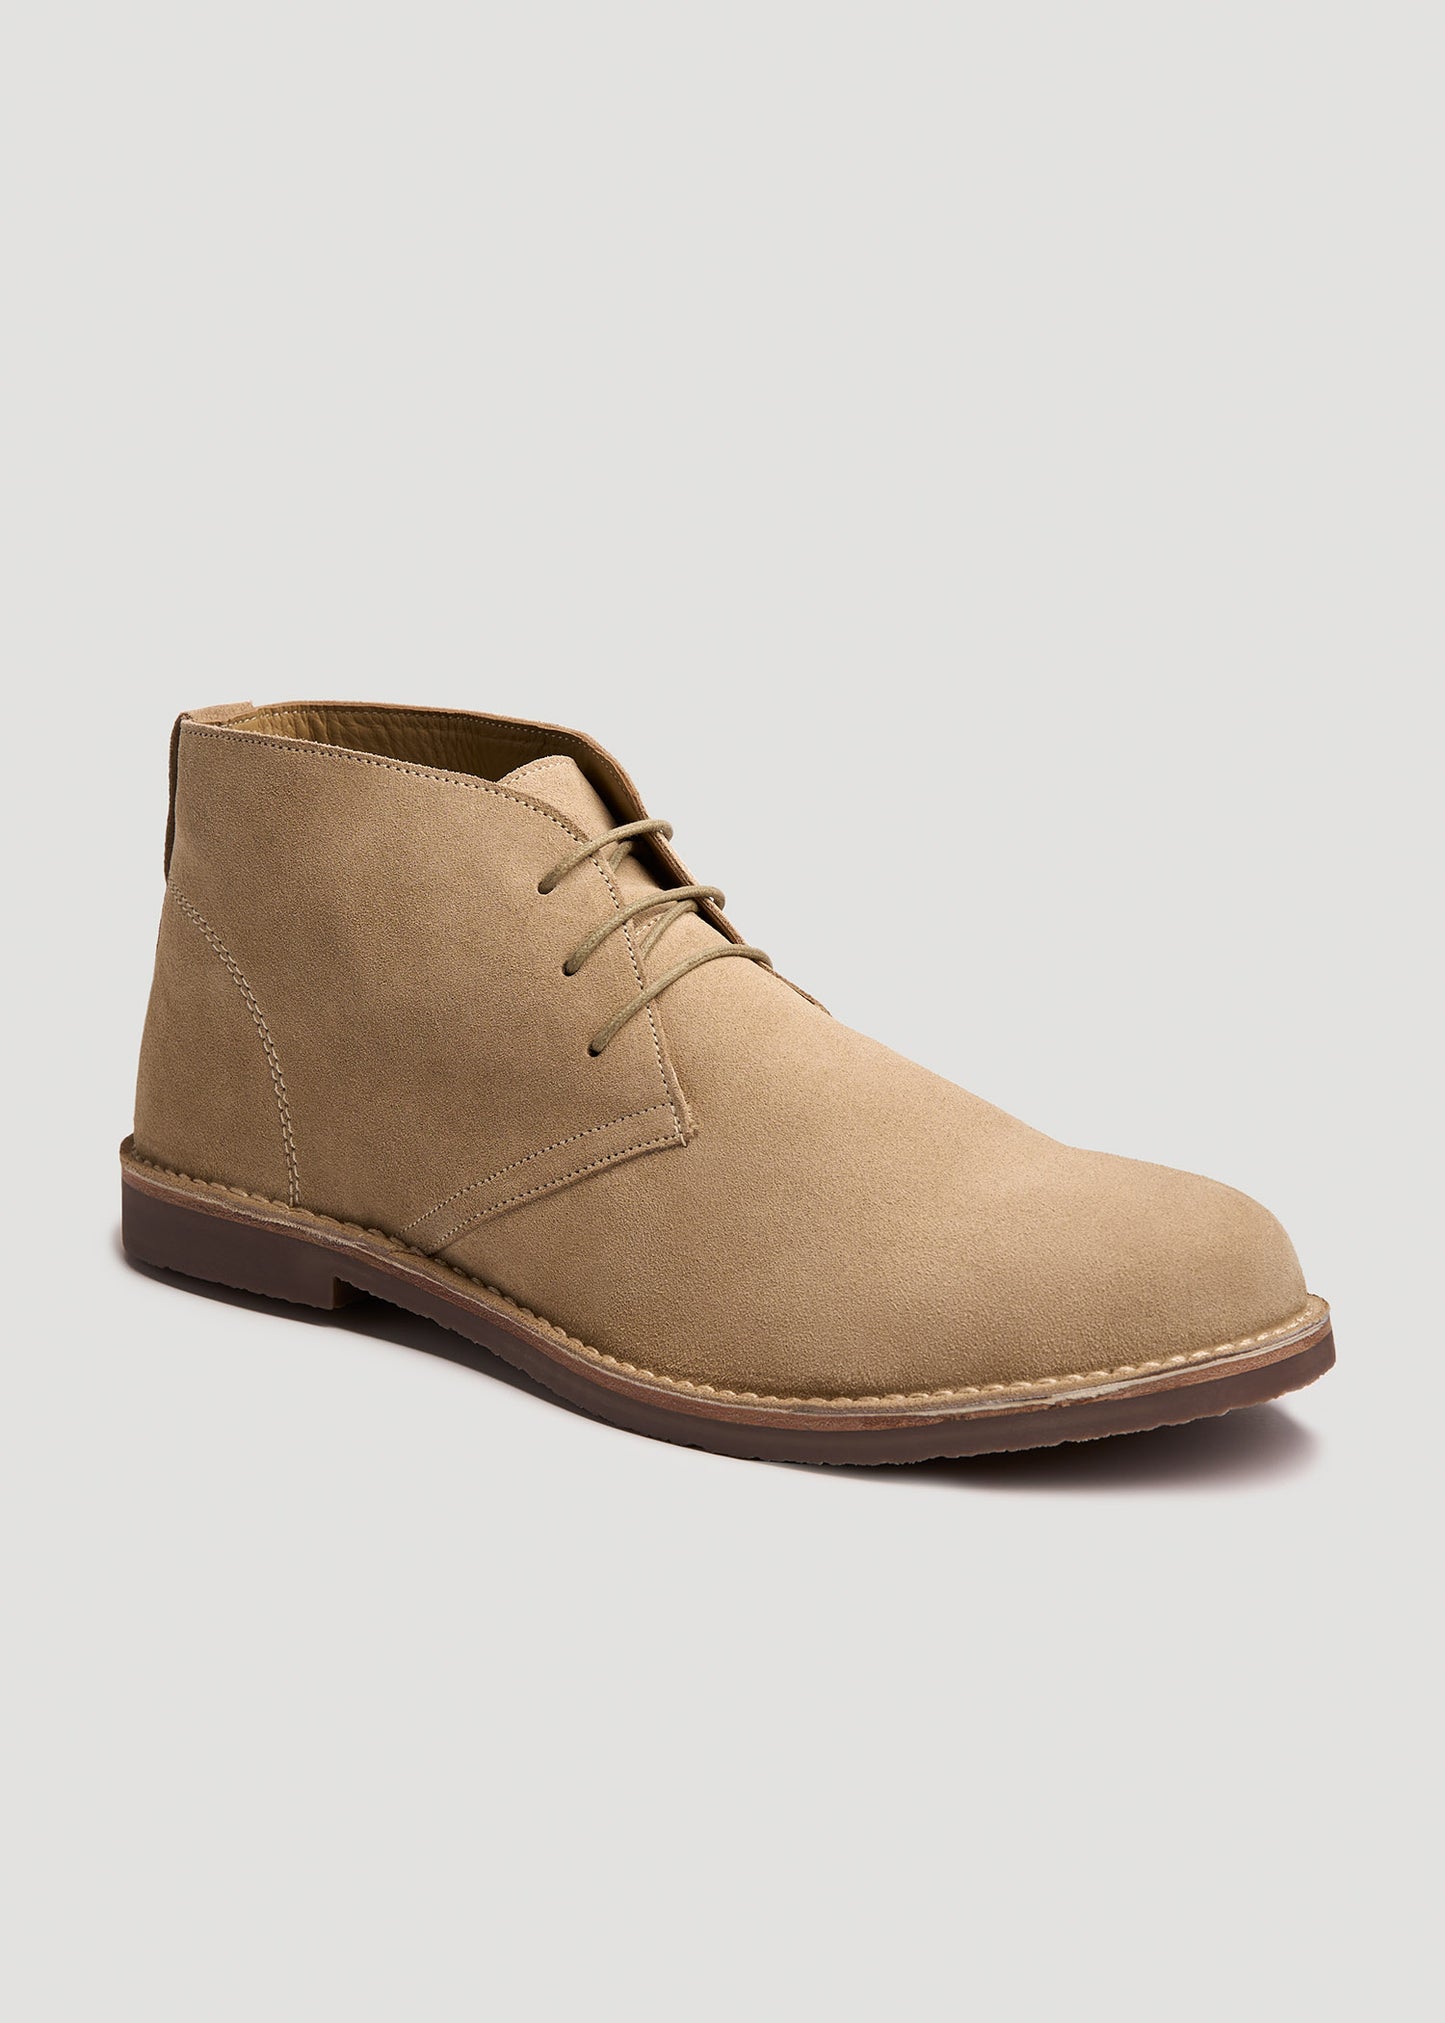 Side view of American Tall's Men's Suede Desert Boots in Grey.